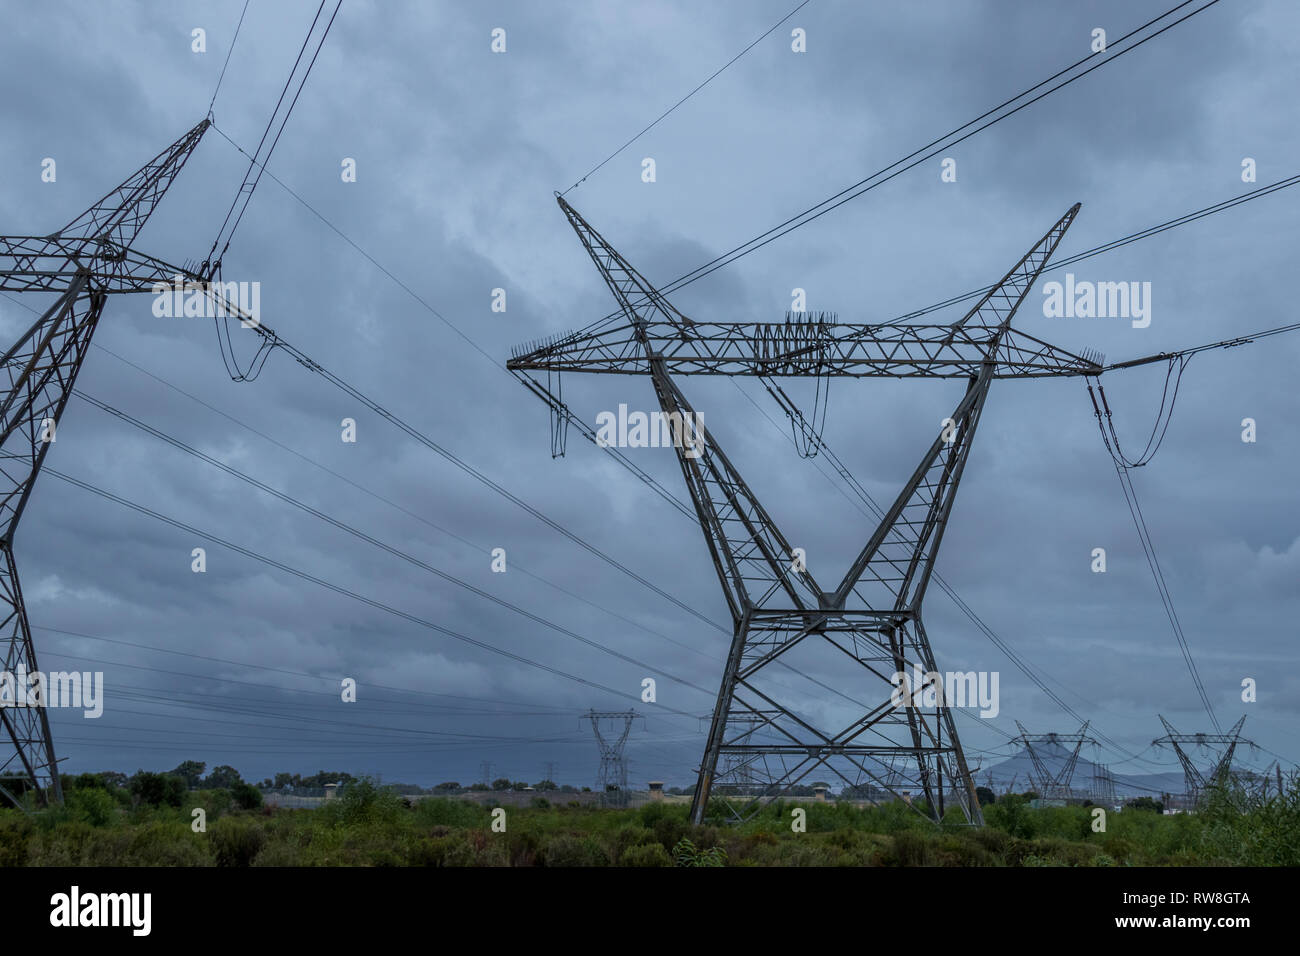 Cape Town, South Africa - the government owned power utility, Eskom,is on  the verge of collapse due to serious corruption and graft image in  landscape Stock Photo - Alamy